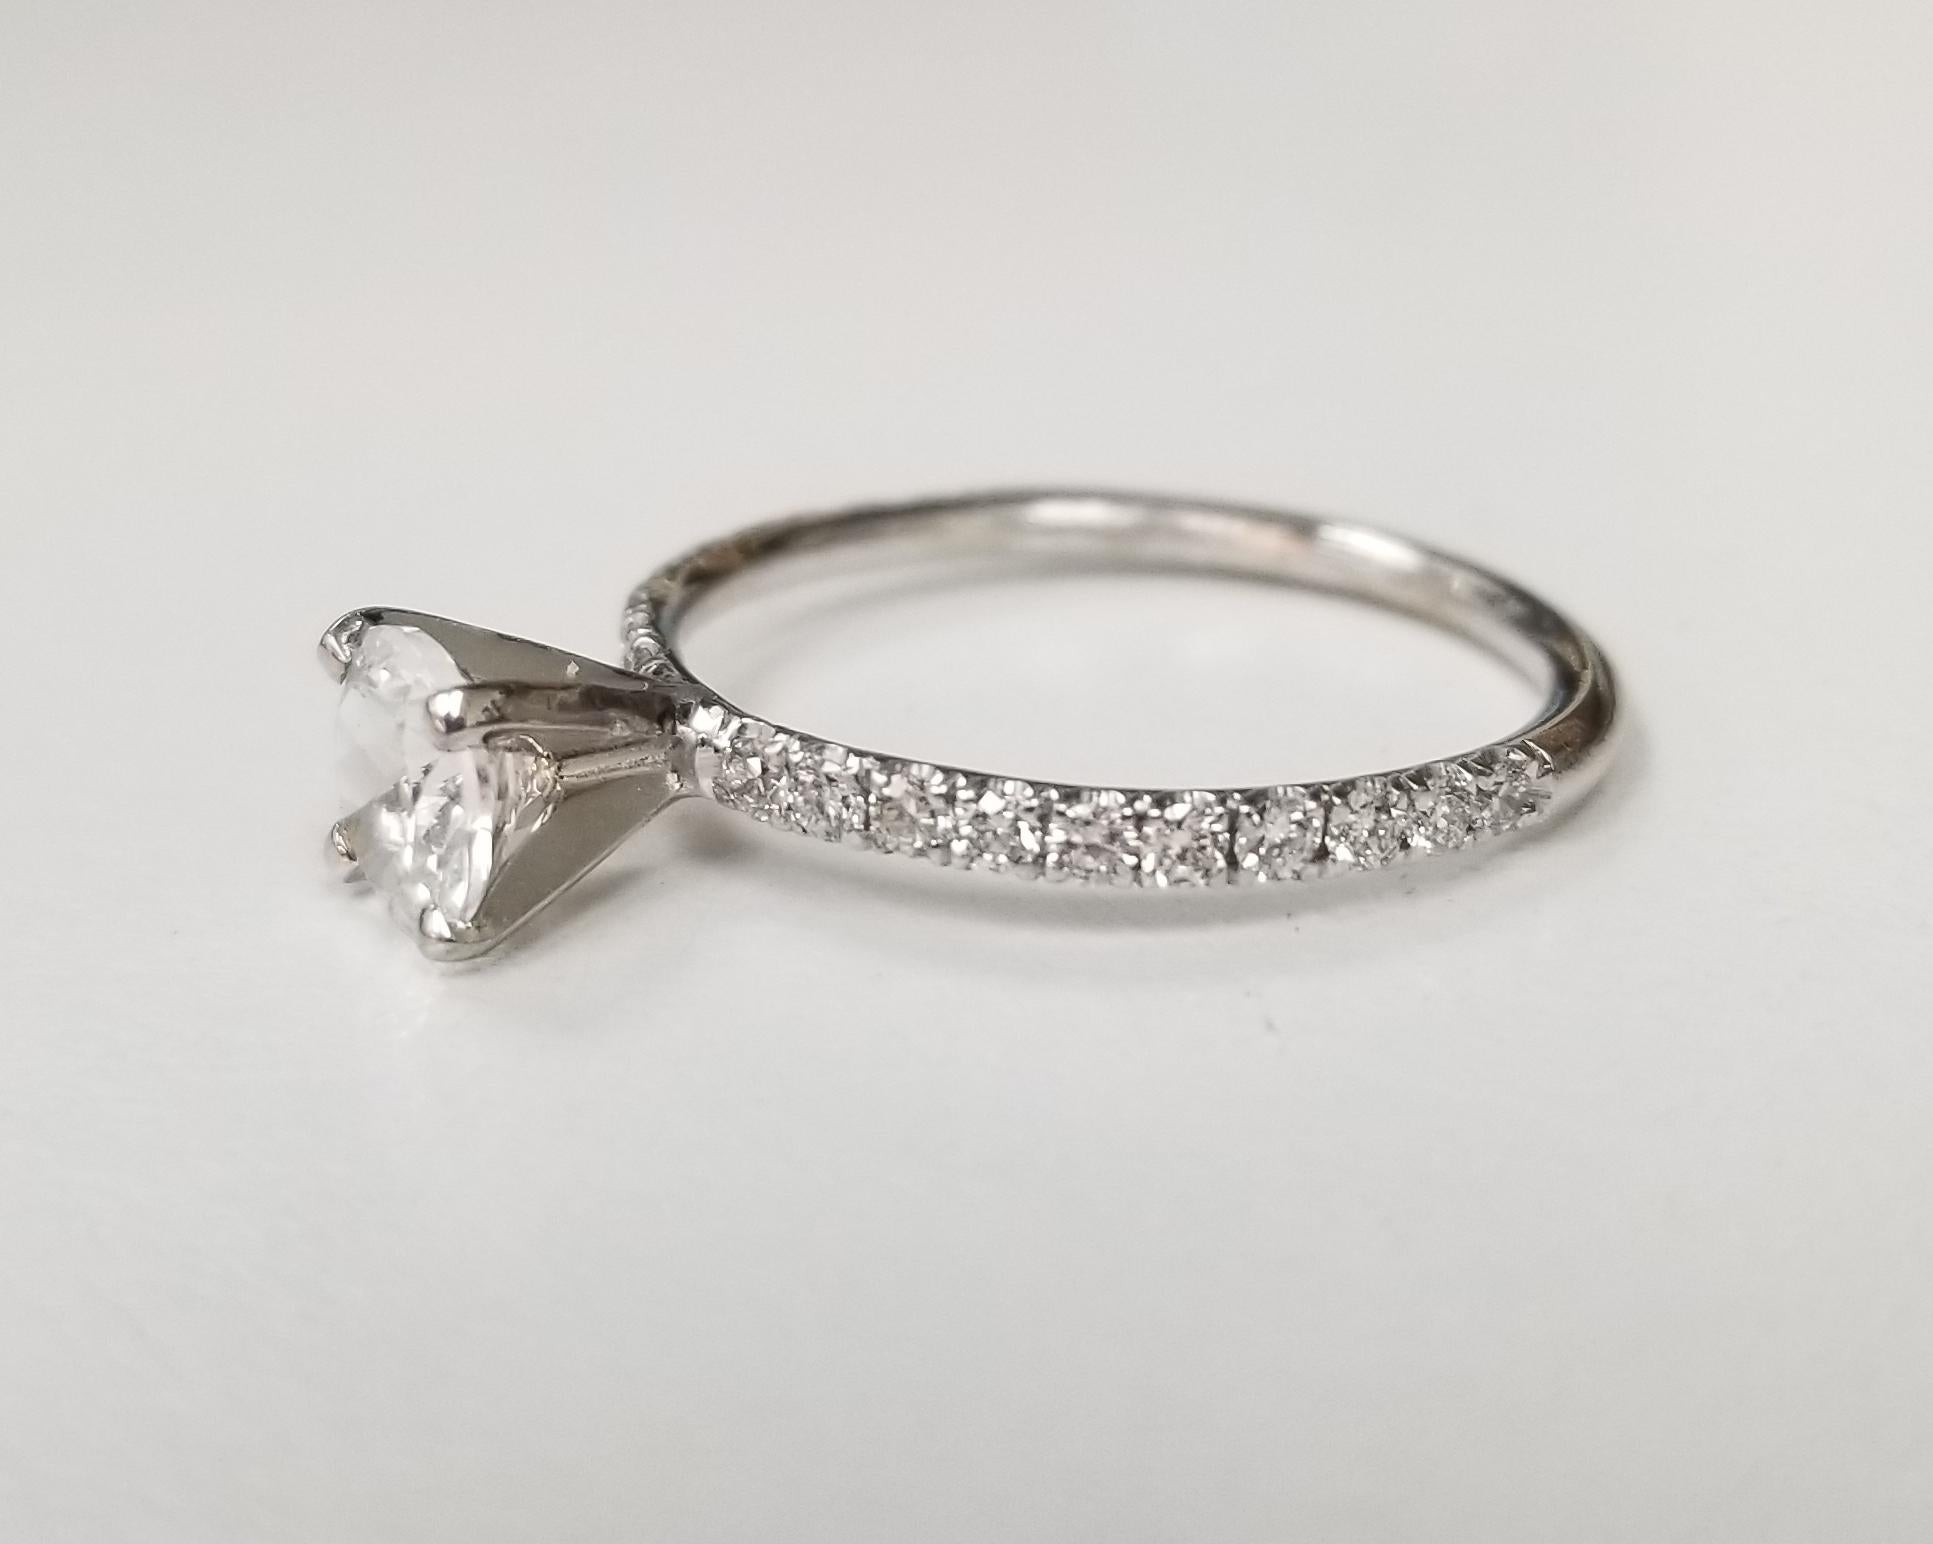 14k white gold diamond engagement ring with white sapphire center containing; 1 5.75mm round white sapphire and 20 round full cut diamonds weighing .30pts. the ring is a size 6.25 and can be sized to fit for free.